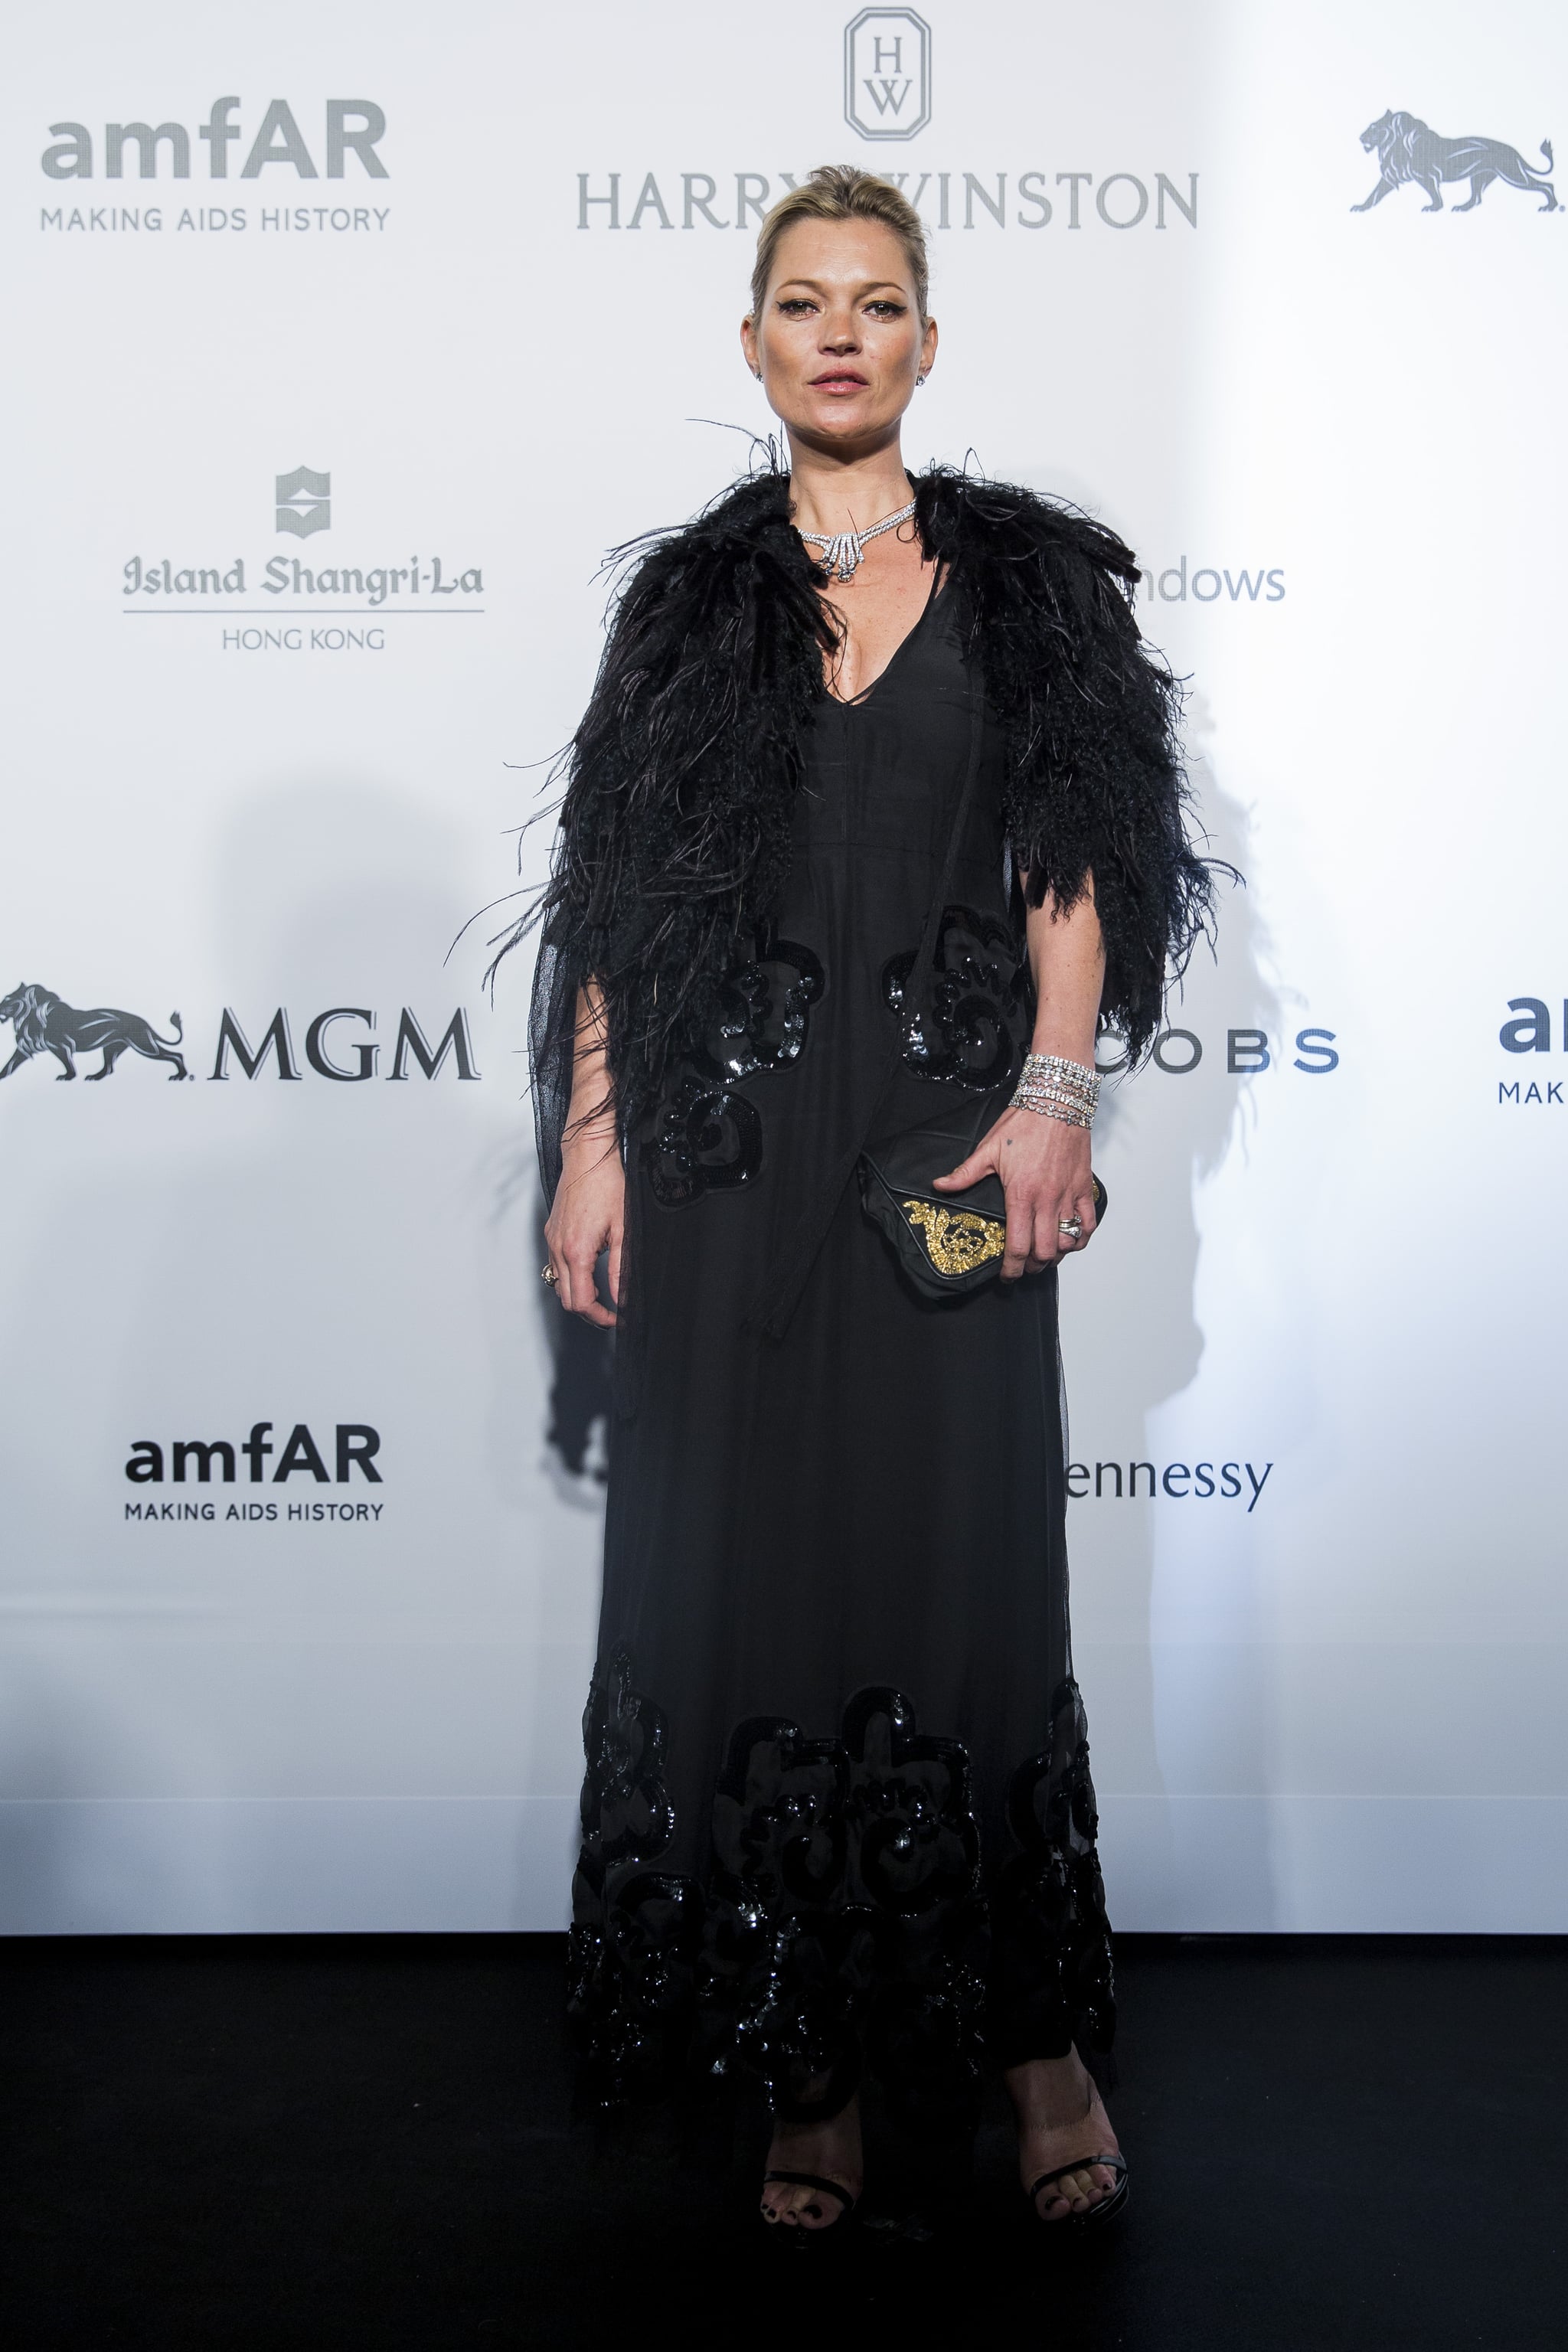 An ostrich-feather cape added a touch of Kate's trademark vintage glam to her long black gown at the 2015 amfAR gala in Hong Kong in March 2015.